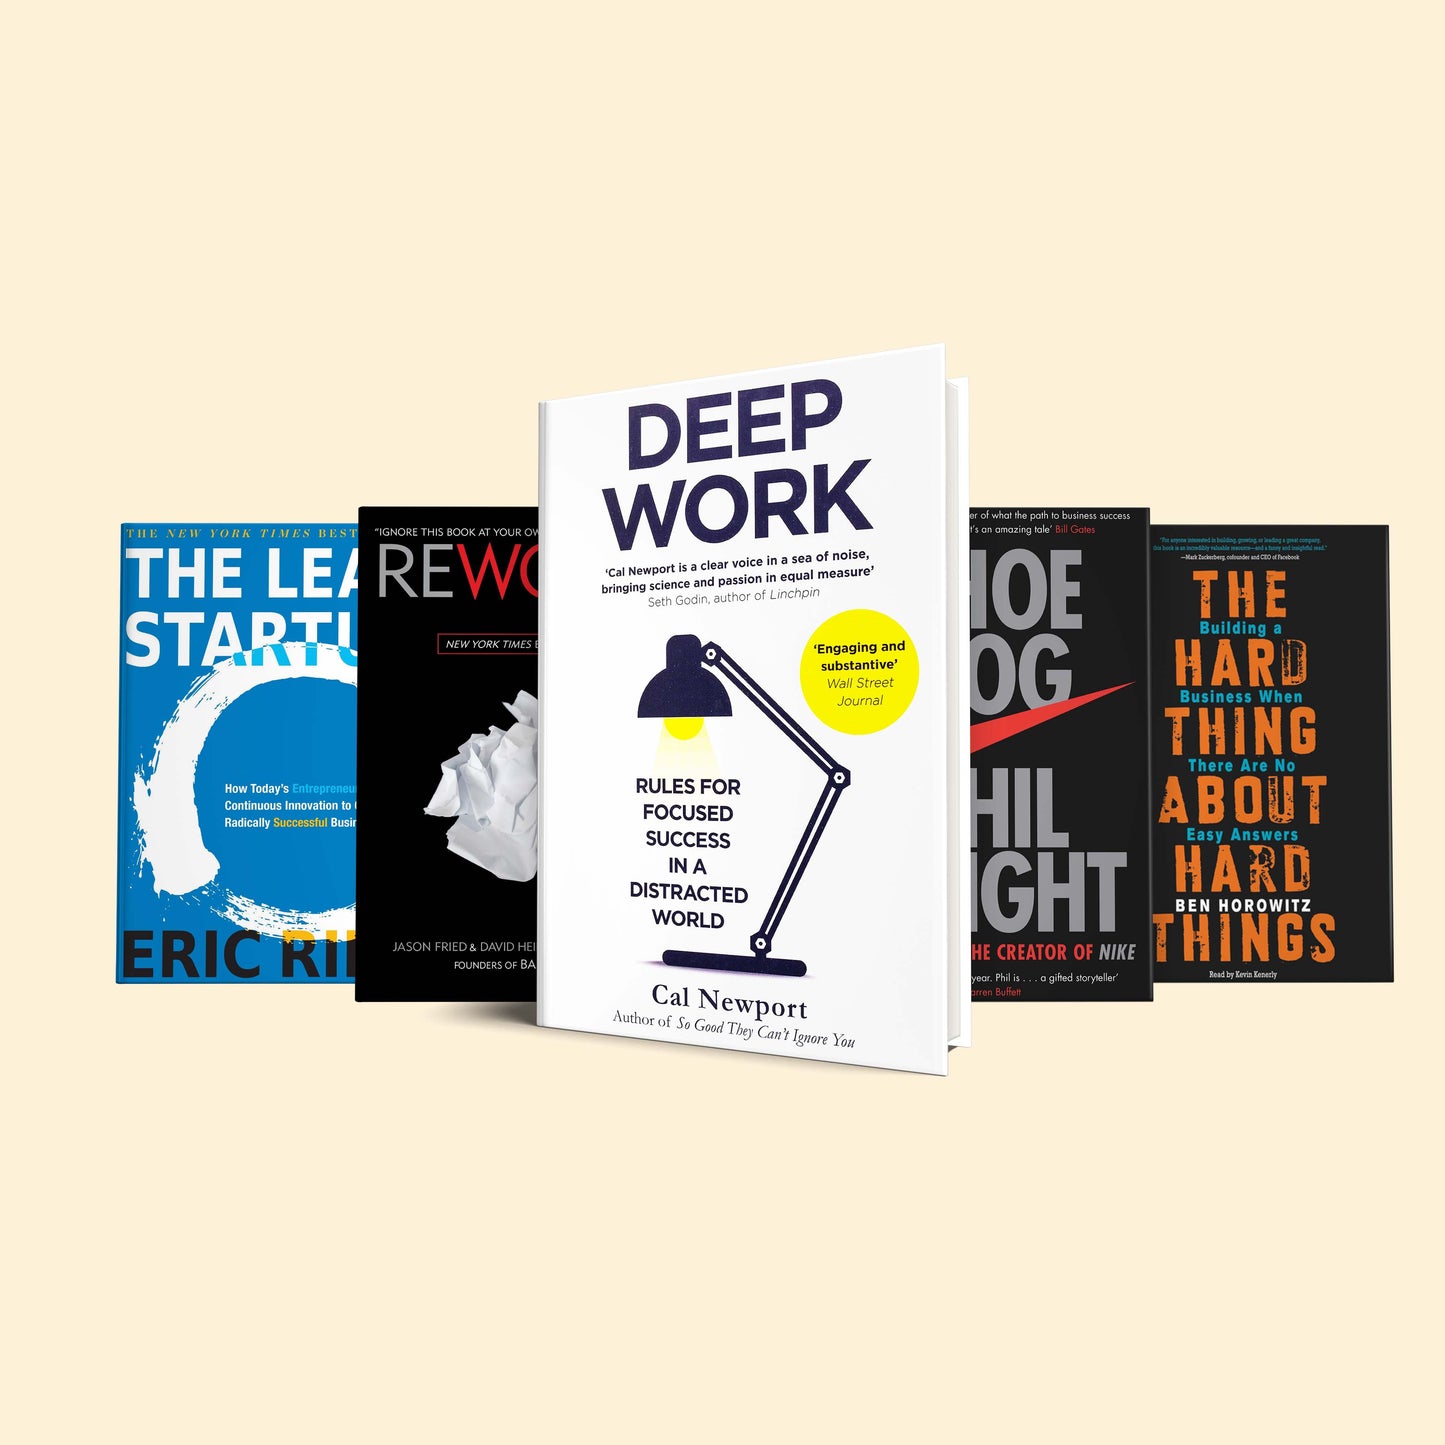 Growth in life & business set of books : Deep work, Shoe dog, Rework, The hard thing about hard things, The lean startup